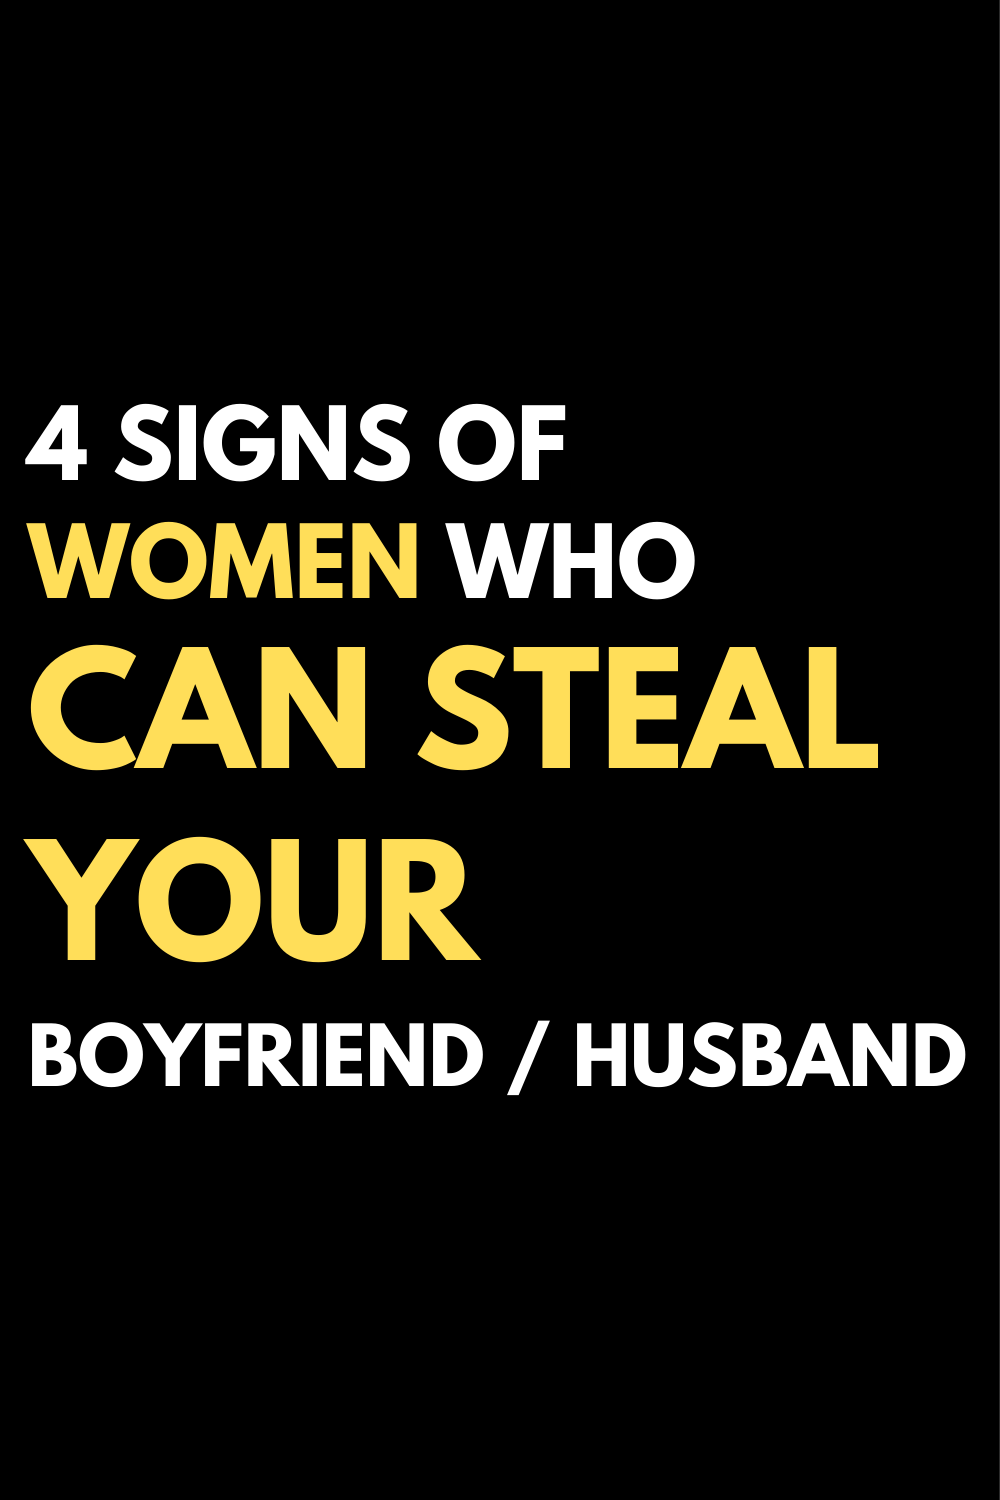 4 signs of women who can steal your boyfriend / husband